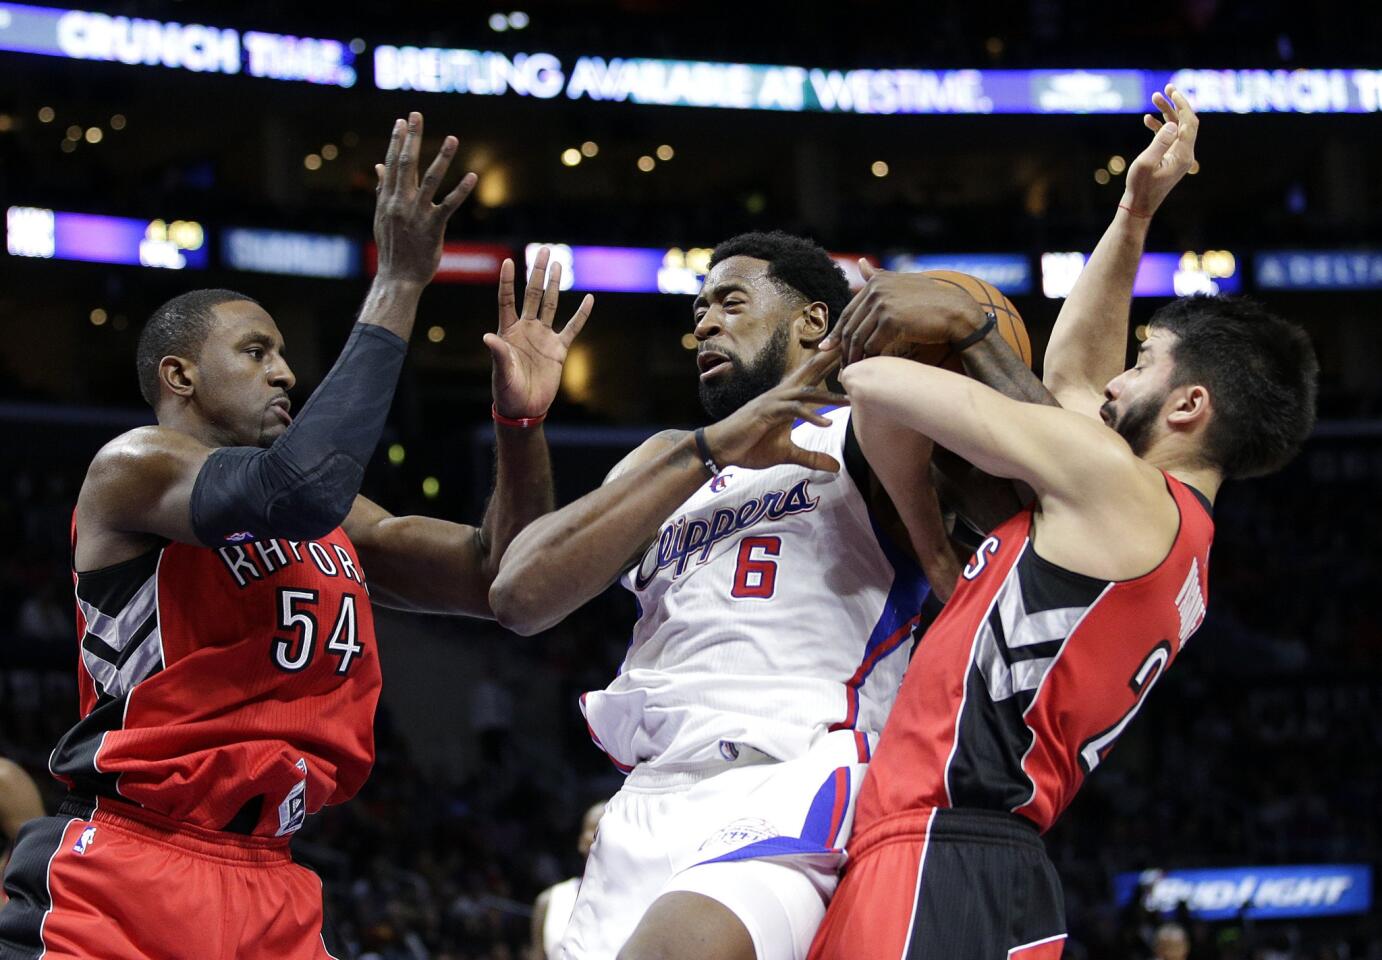 Clippers center DeAndre Jordan (6) tries to pull down a rebound between Raptors center Patrick Patterson (54) and guard Greivis Vasquez in the first half.